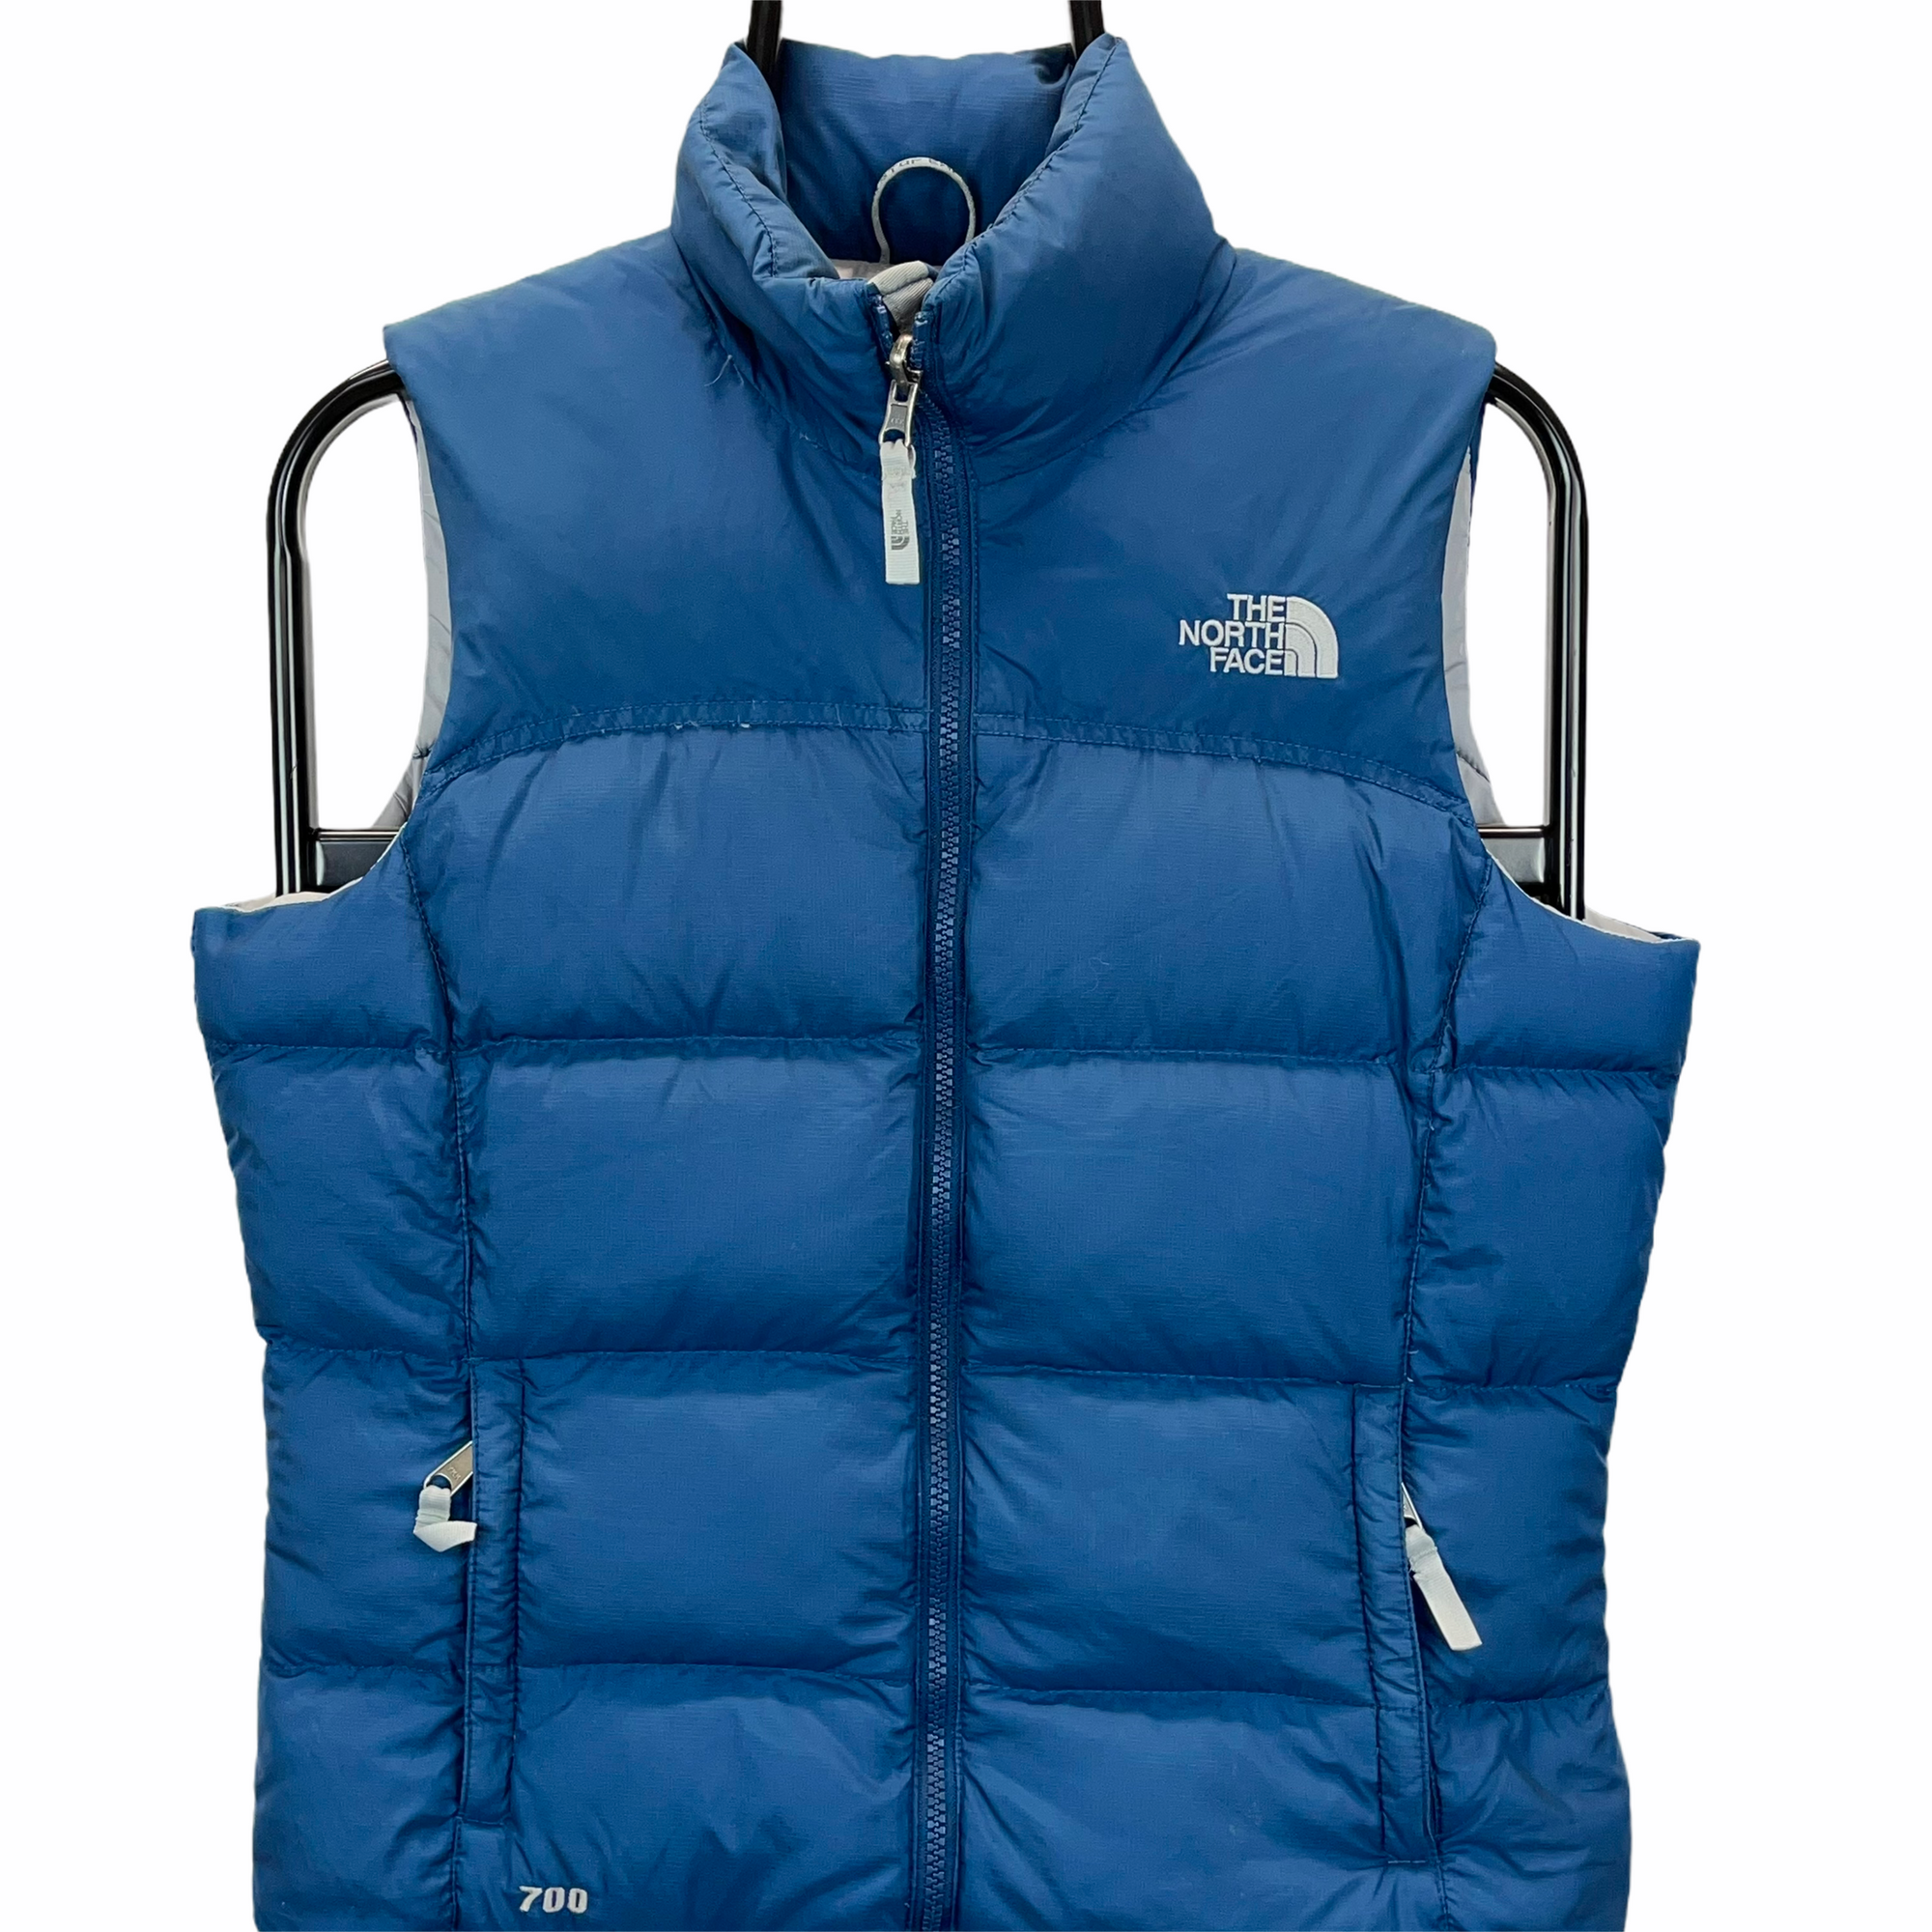 THE NORTH FACE NUPTSE 700 GILET IN PETROL BLUE - MEN'S XS/WOMEN'S SMALL